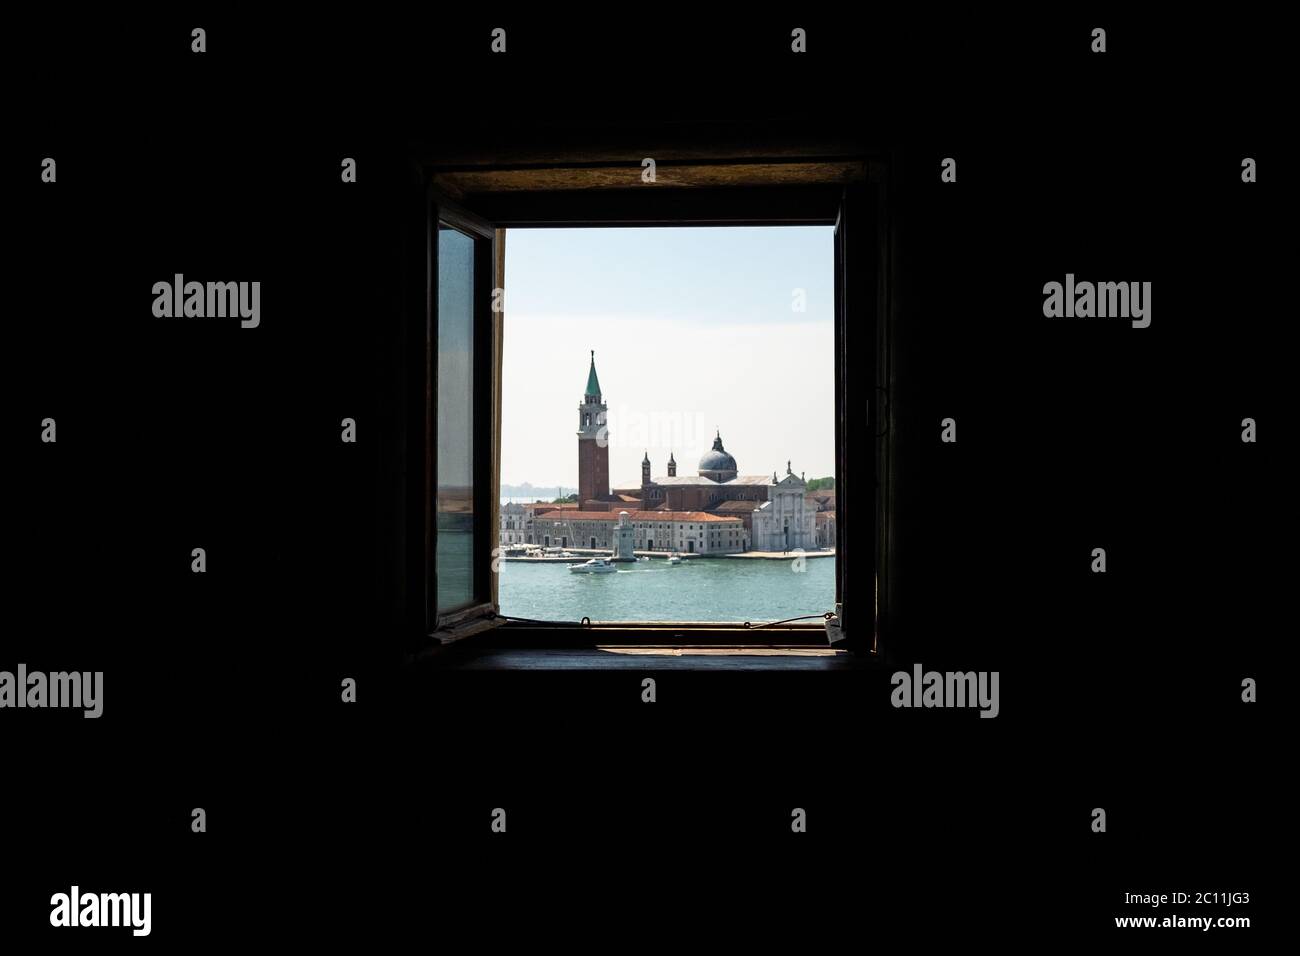 VENICE, ITALY - JUNE 13, 2020: A view from the Ducale Palace Museum the day of the reopening after more than 3 months of closure due to the lockdown for Covid-19 on June 13, 2020 in Venice, Italy. Stock Photo